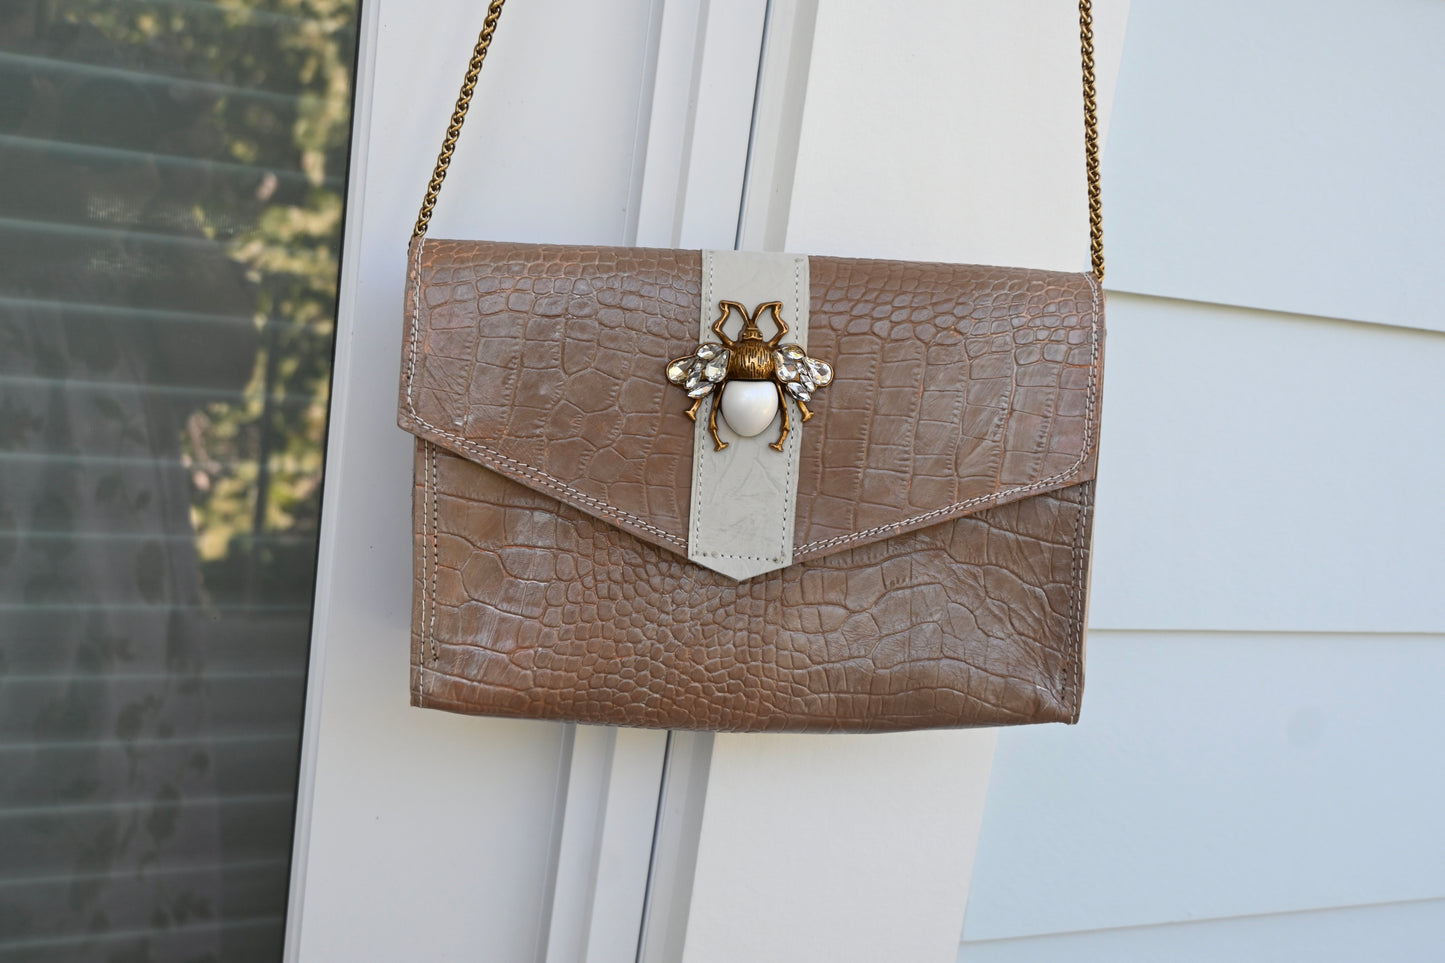 Katherine Style Handbag in Pearly Tan with Bee